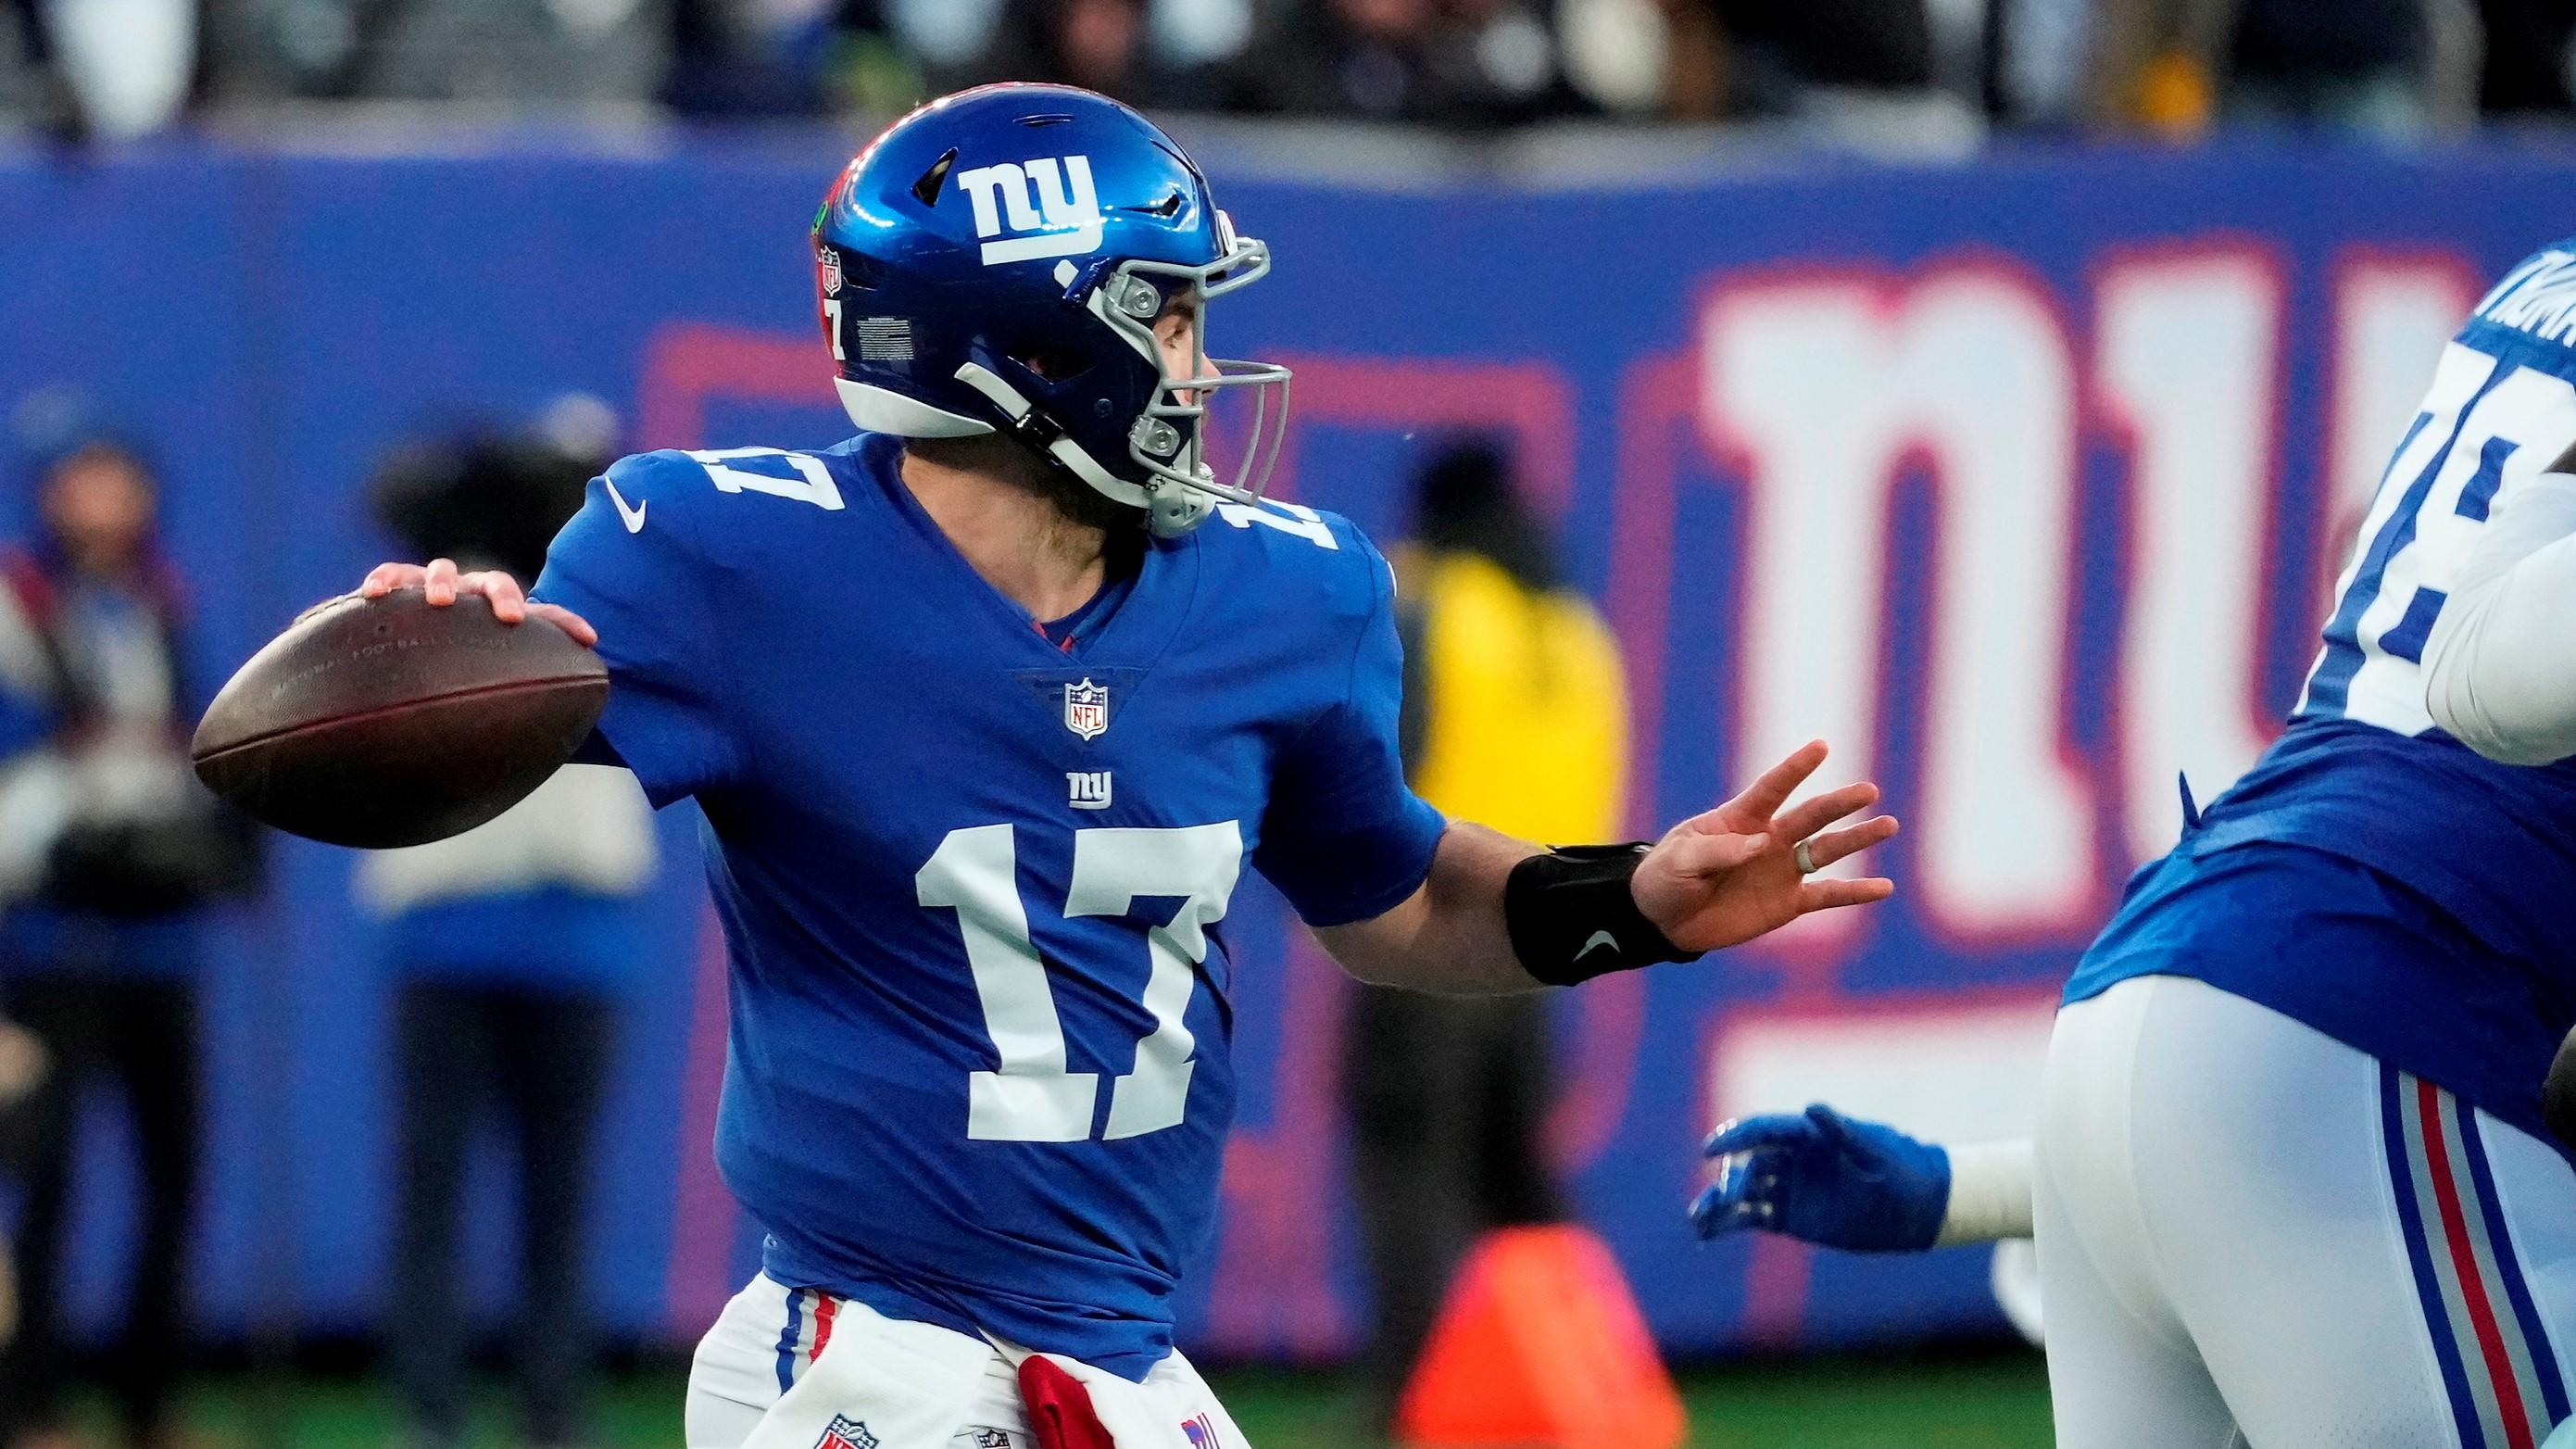 Dec 19, 2021; East Rutherford, N.J., USA; New York Giants quarterback Jake Fromm (17) throws late in the fourth quarter against the Dallas Cowboys at MetLife Stadium. / Robert Deutsch-USA TODAY Sports